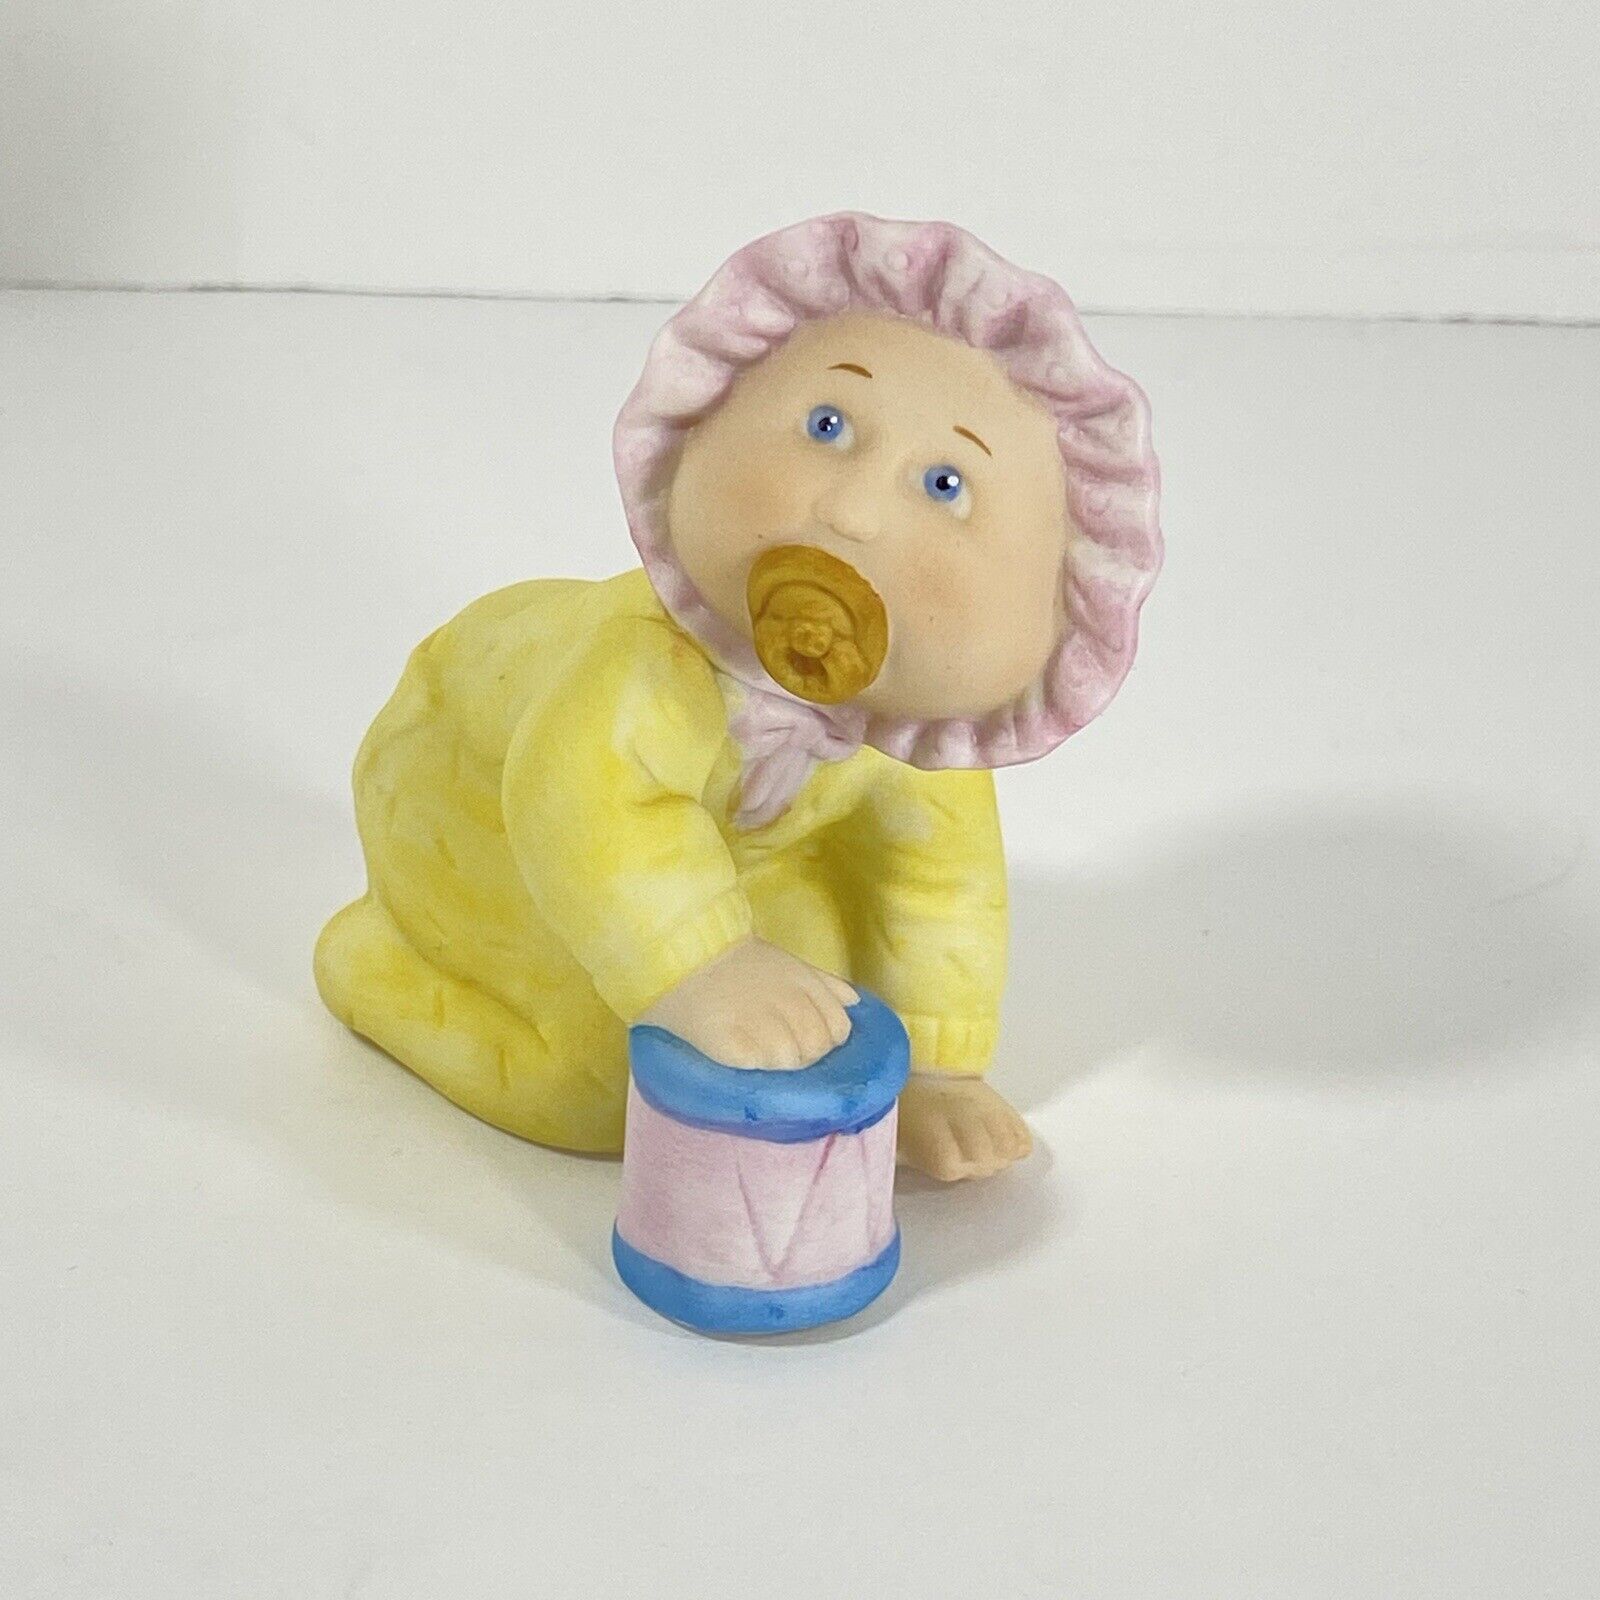 Vintage Cabbage Patch Kids 1984 Infant Baby Crawling Ceramic Figurine Pacifier